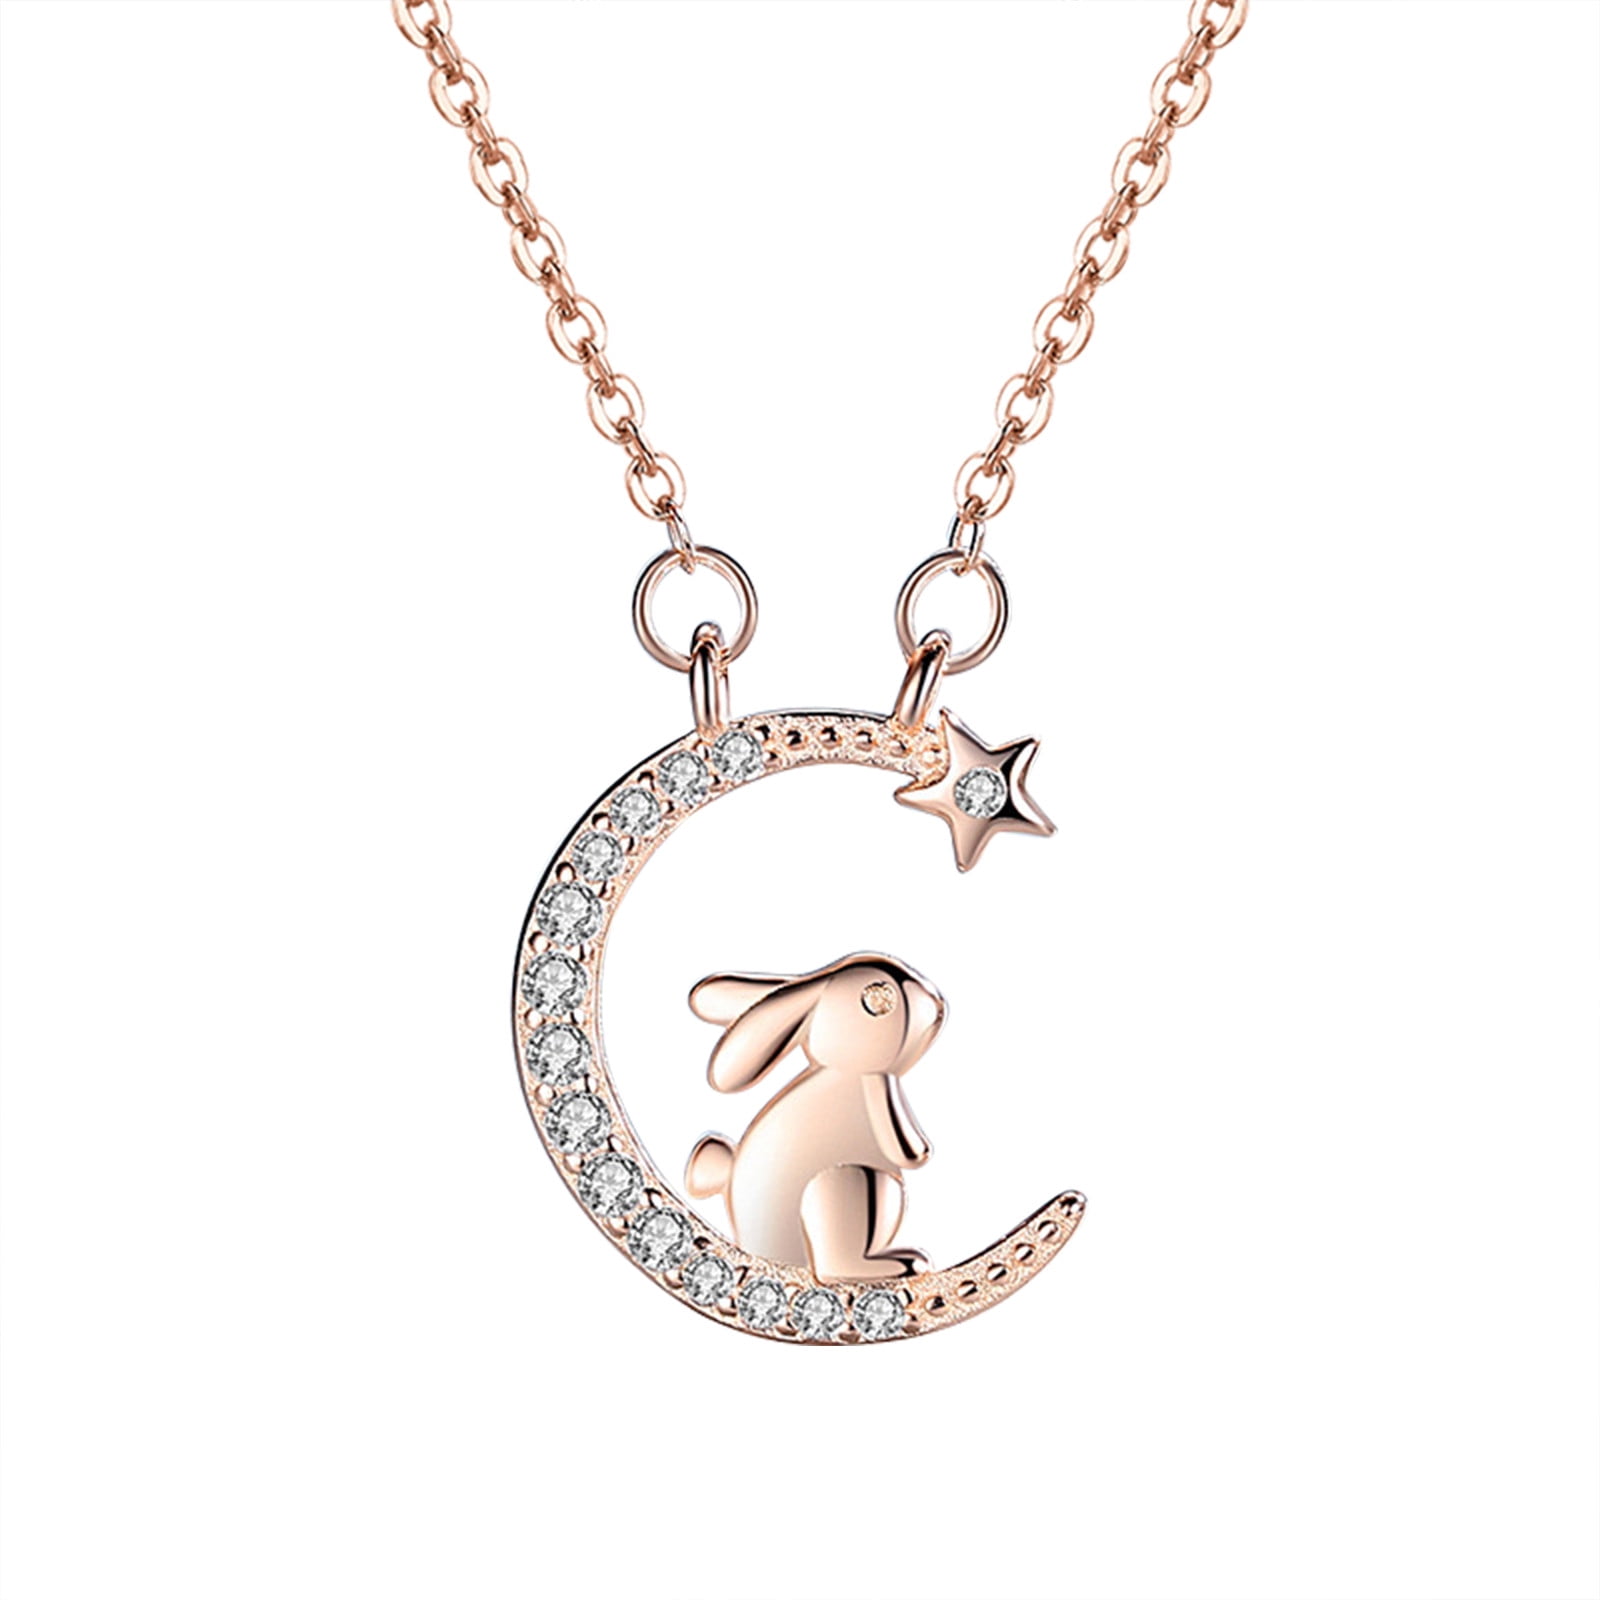 Heiheiup Personality Fashion Moon Cute Rabbit Necklace Pendant For Women  Jewelry Gifts Necklaces Pack for Women